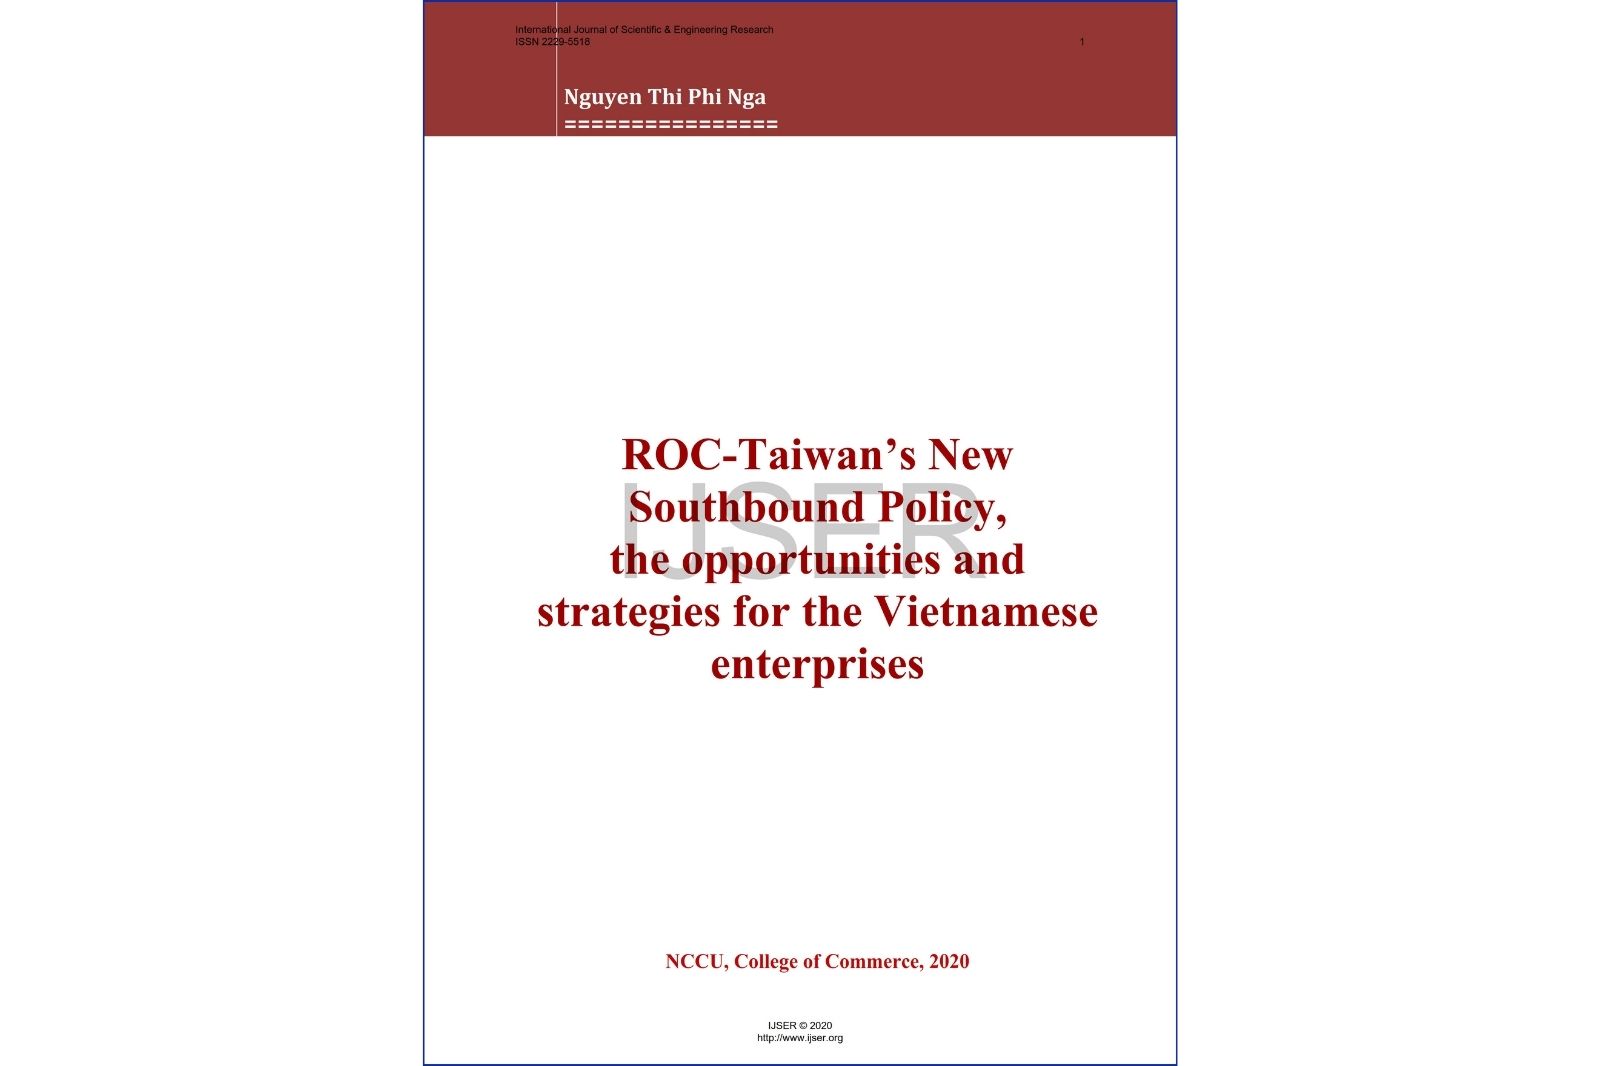 ROC-Taiwan’s New Southbound Policy, the opportunities and strategies for the Vietnamese Enterprises